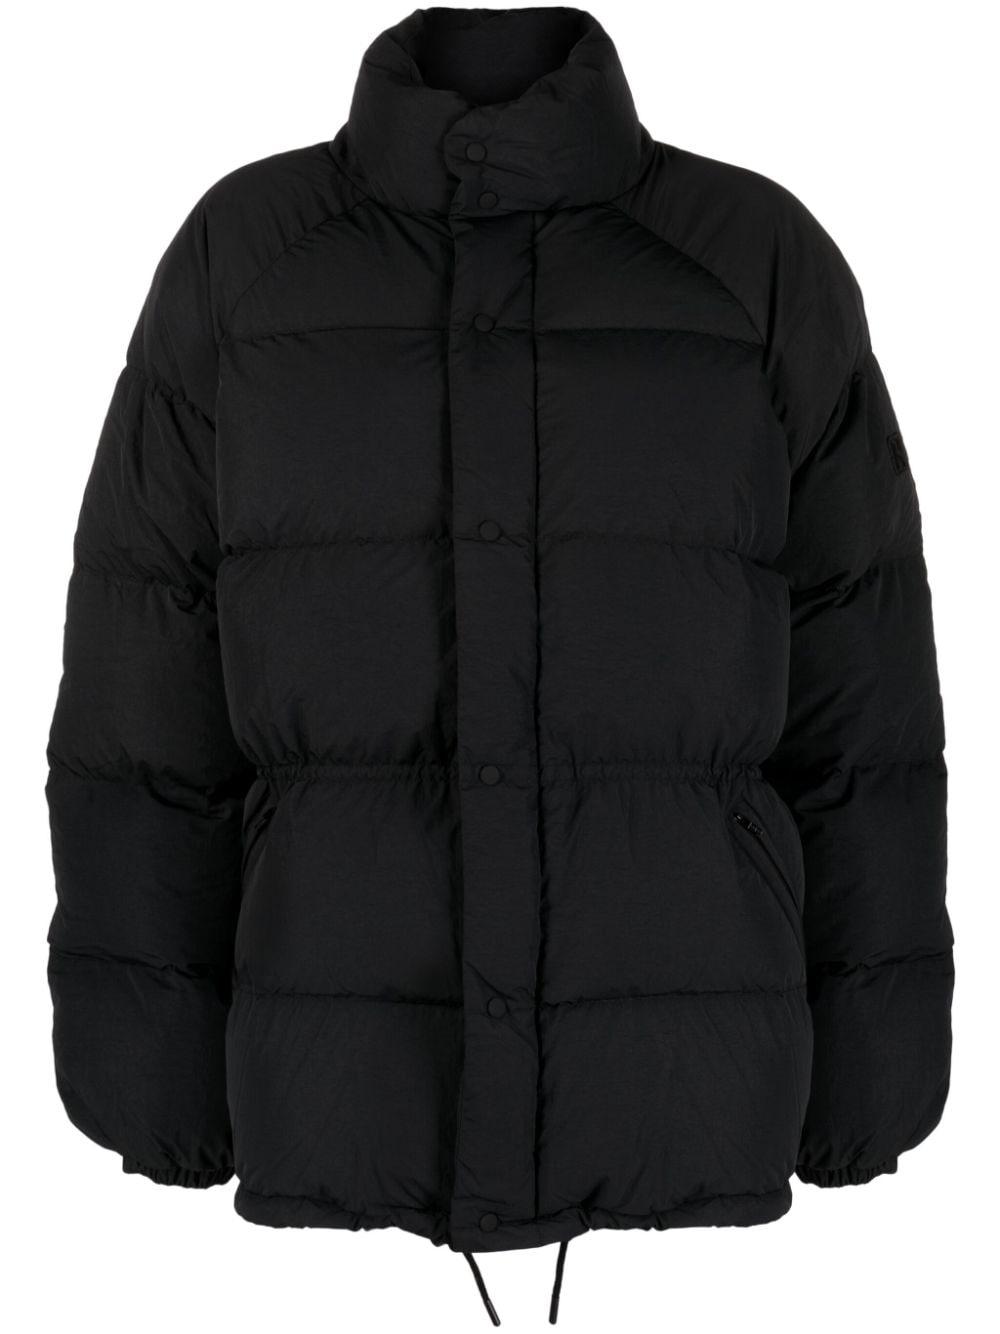 Rodebjer Moura Quilted Puffer Jacket in Black | Lyst